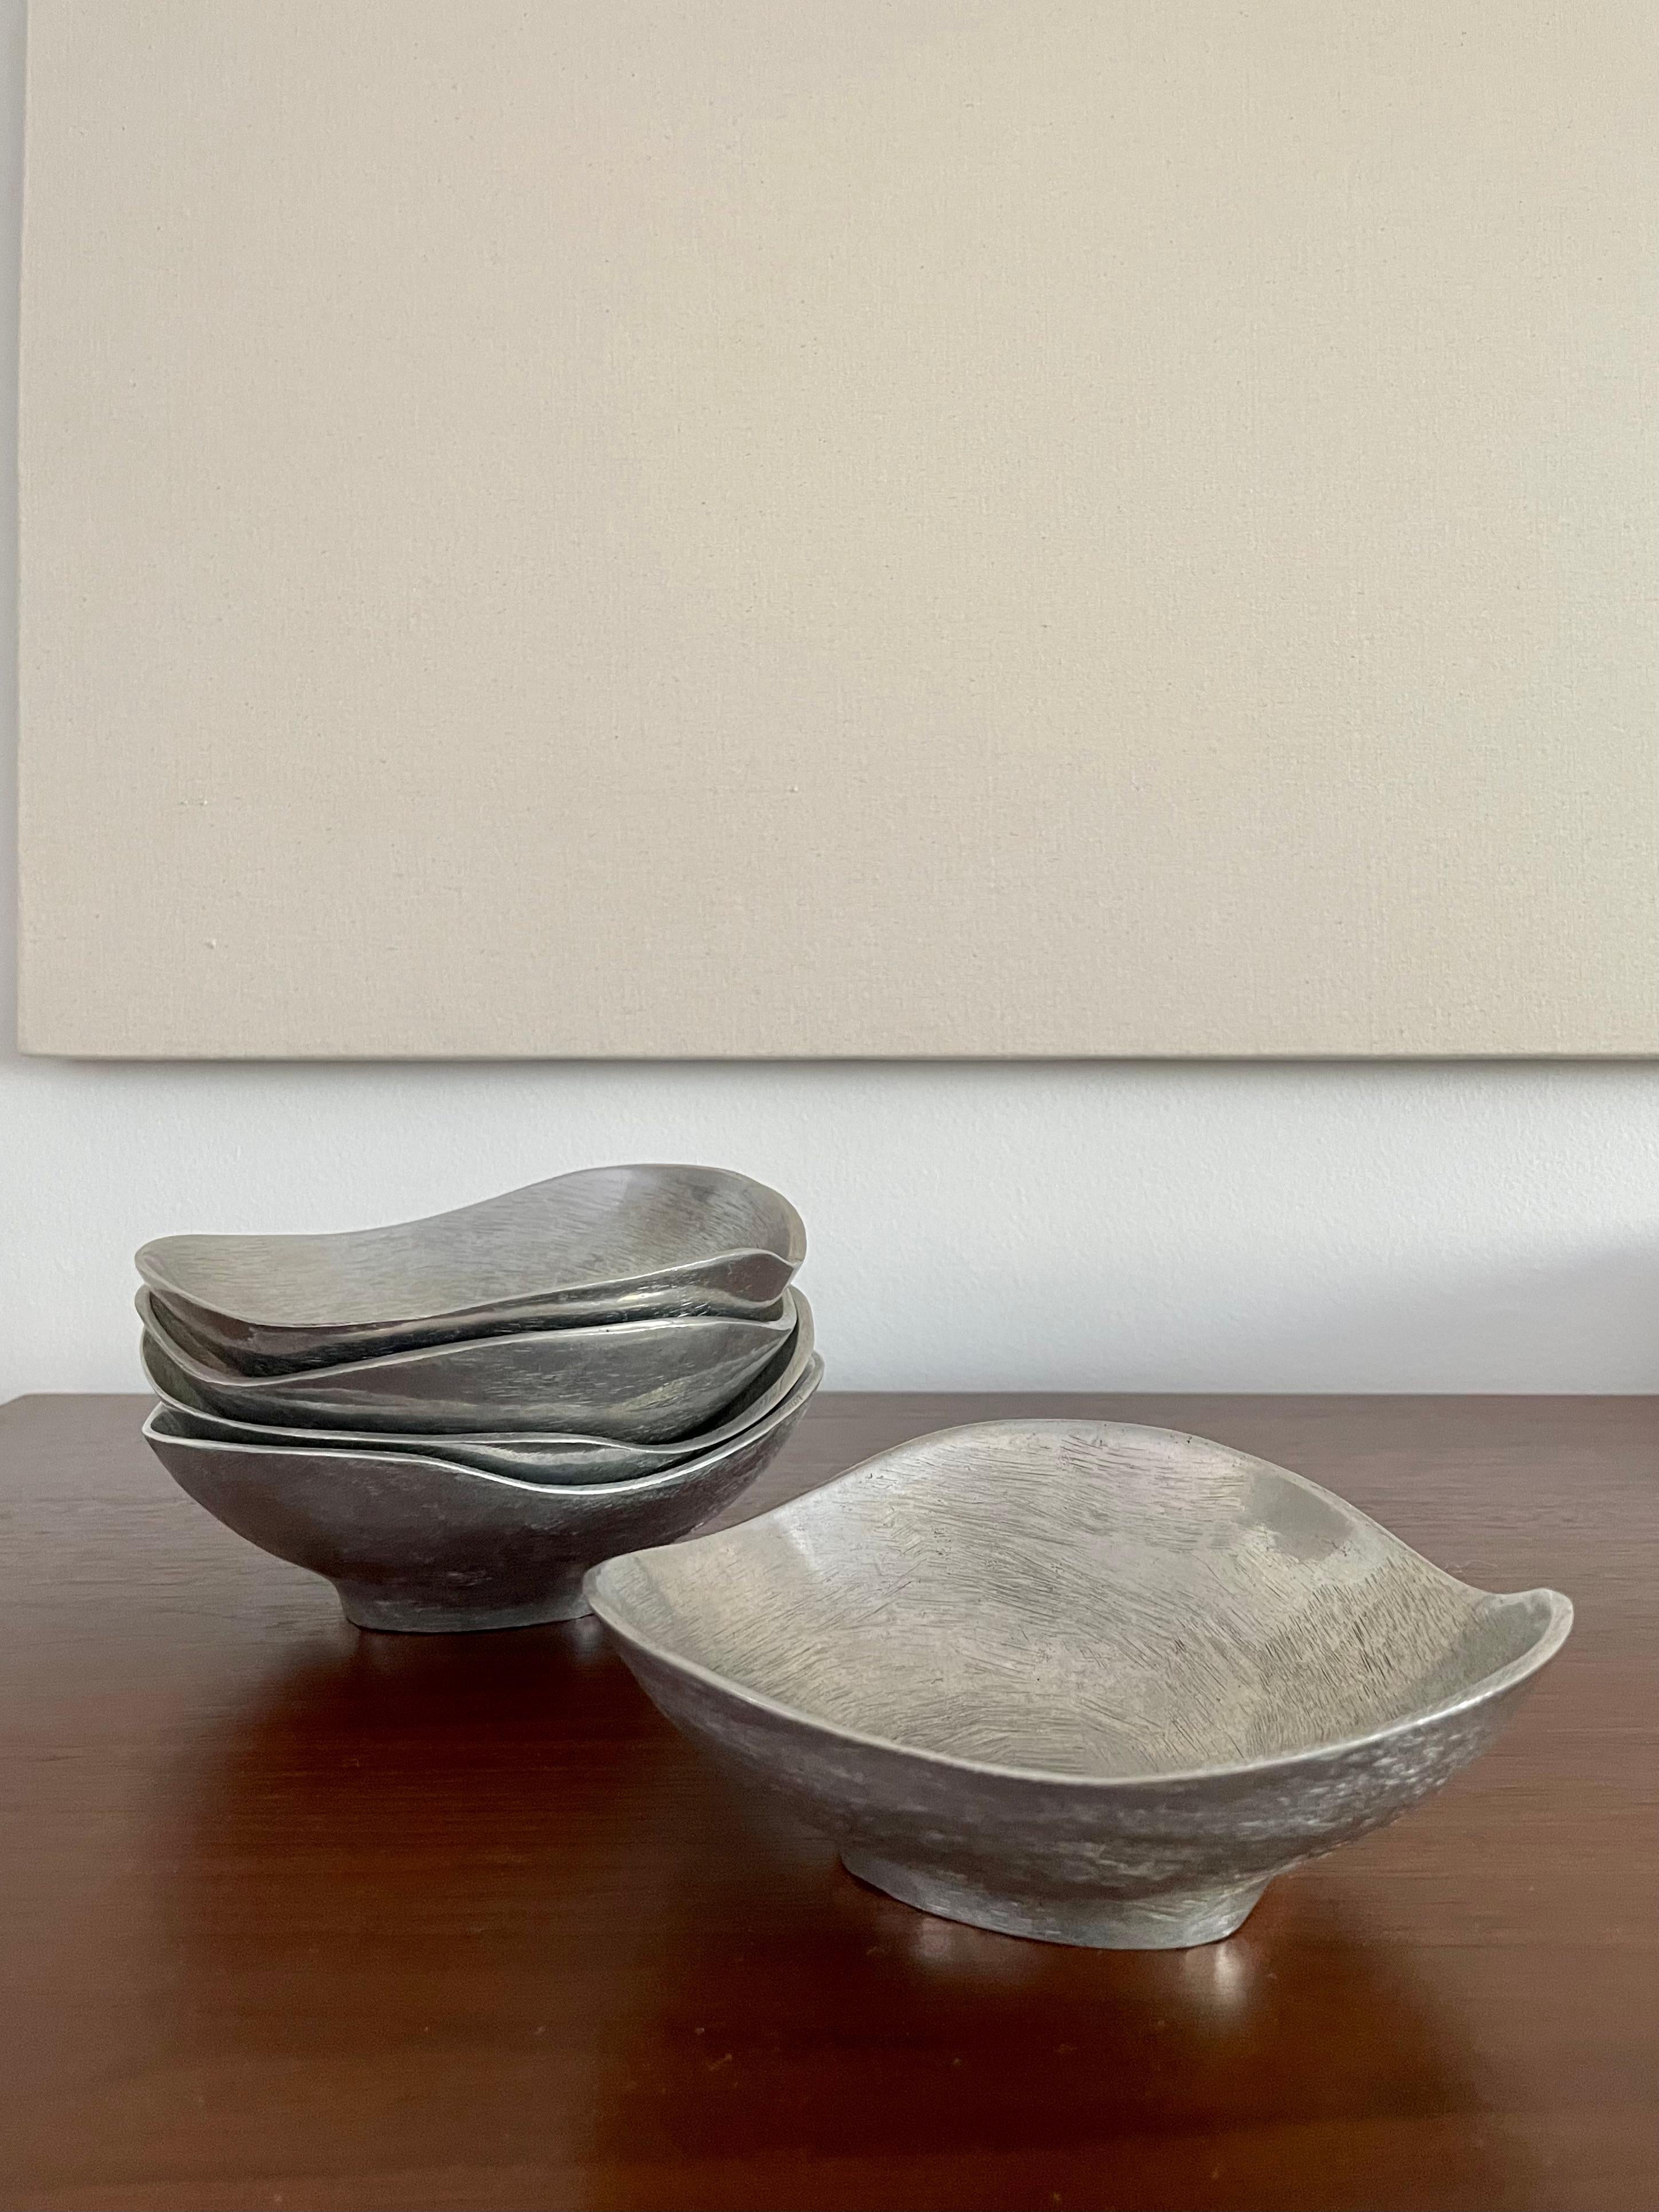 Biomorphic bowl by Bruce C. Fox, 1960s.

Cast and polished aluminum bowl with etchings.

Signed on the underside.